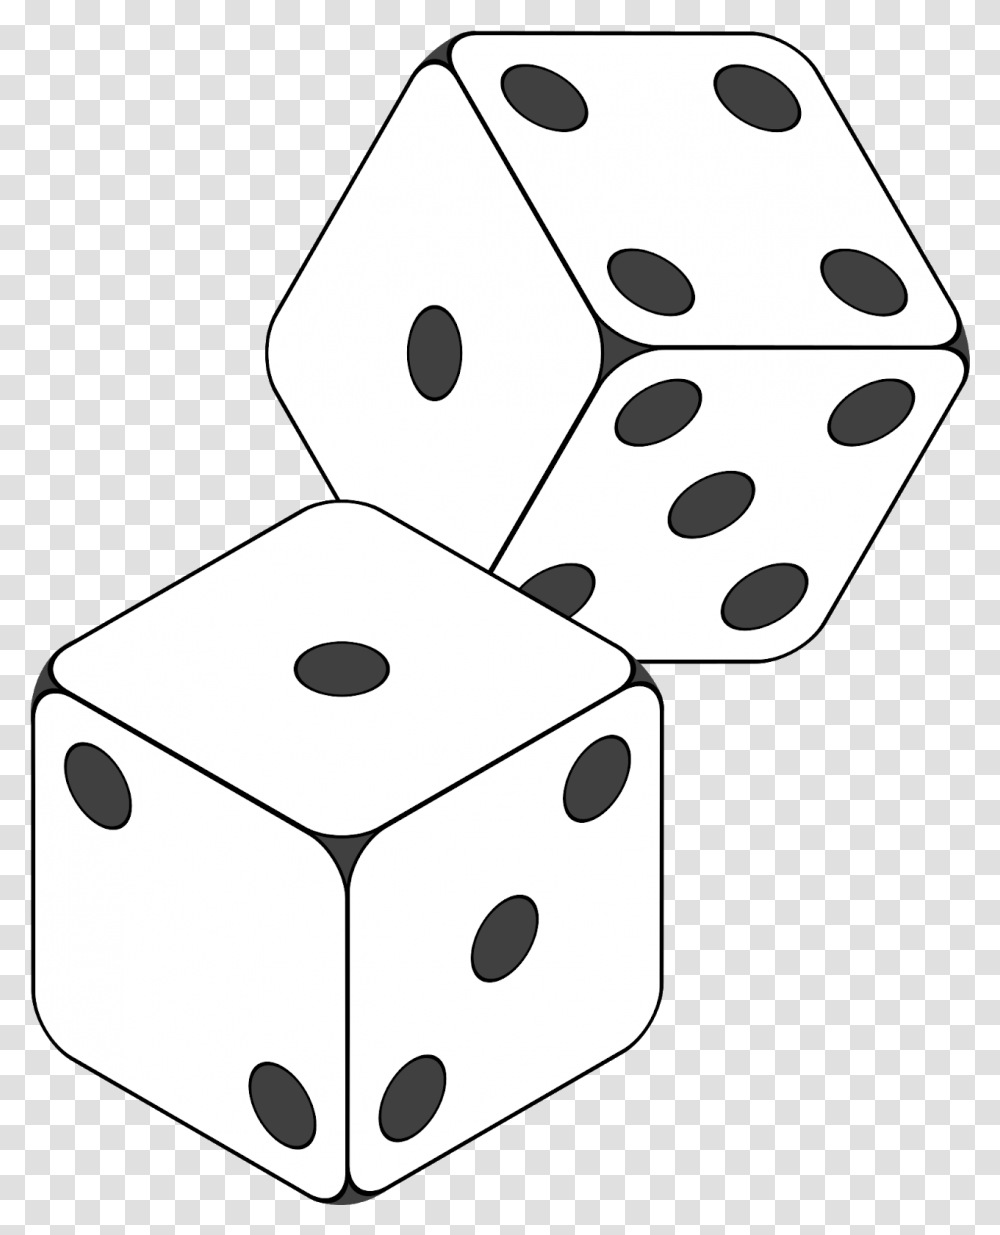 Dice Clipart Math Counter White Dice Black Background, Game Transparent Png